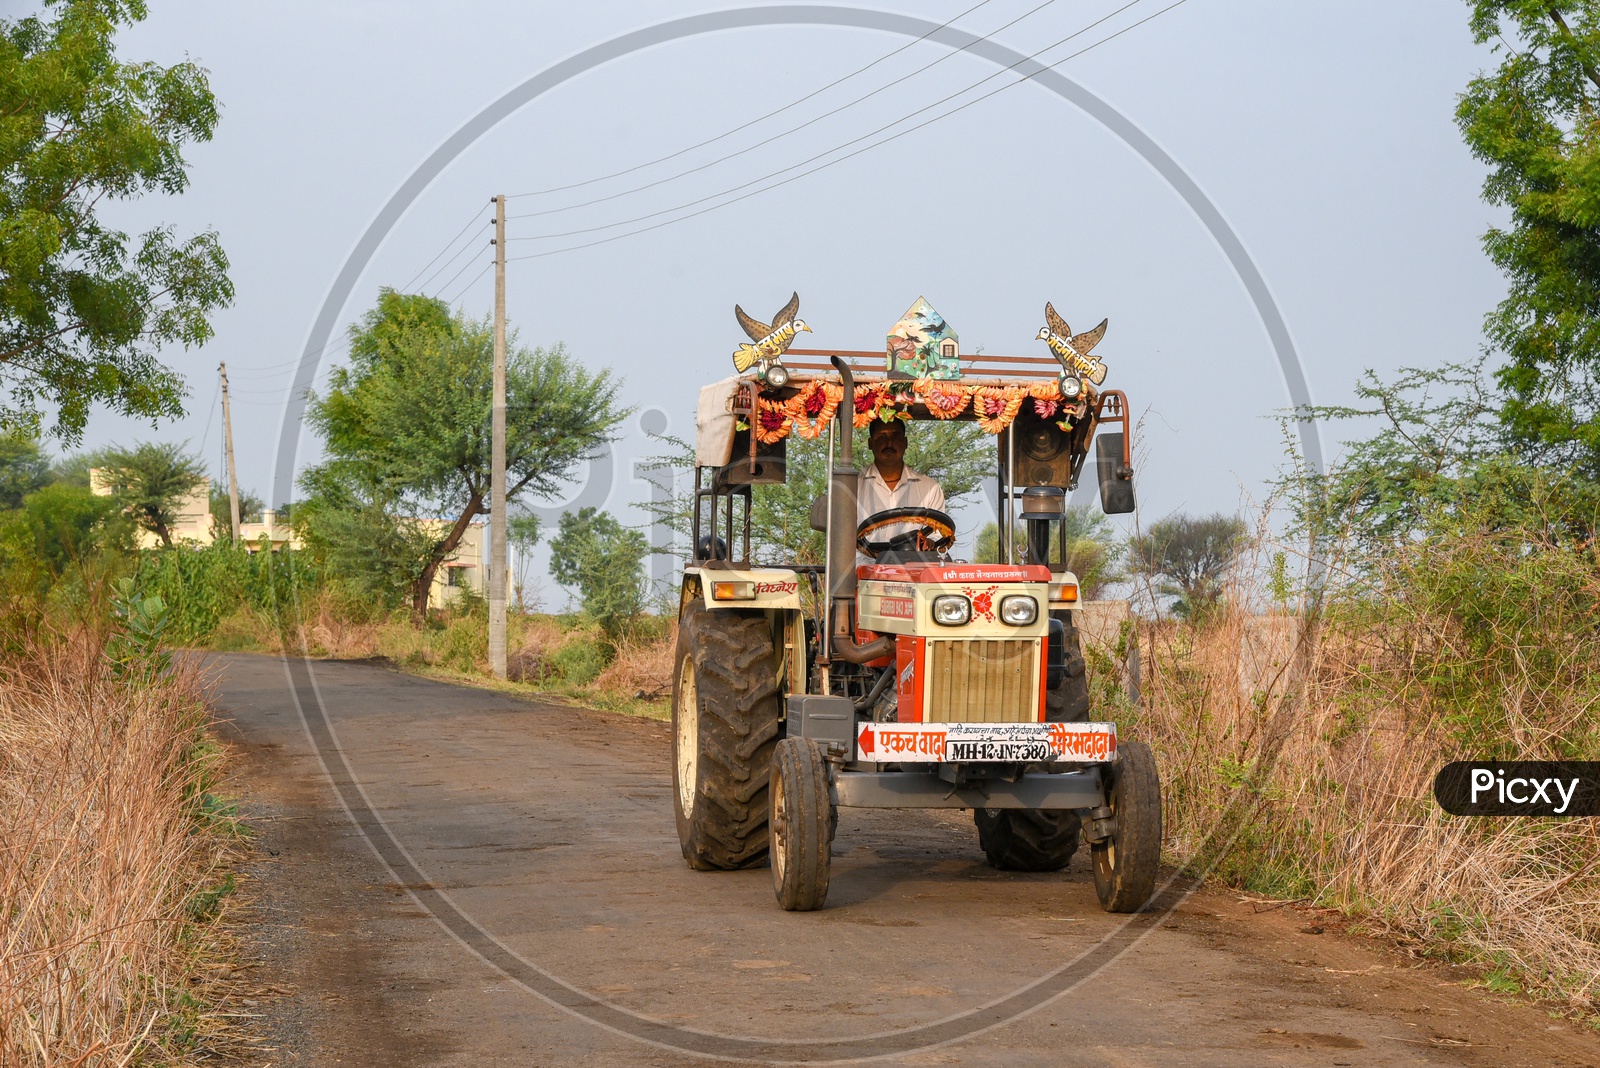 Decorated Tractor at a village in Maharastra